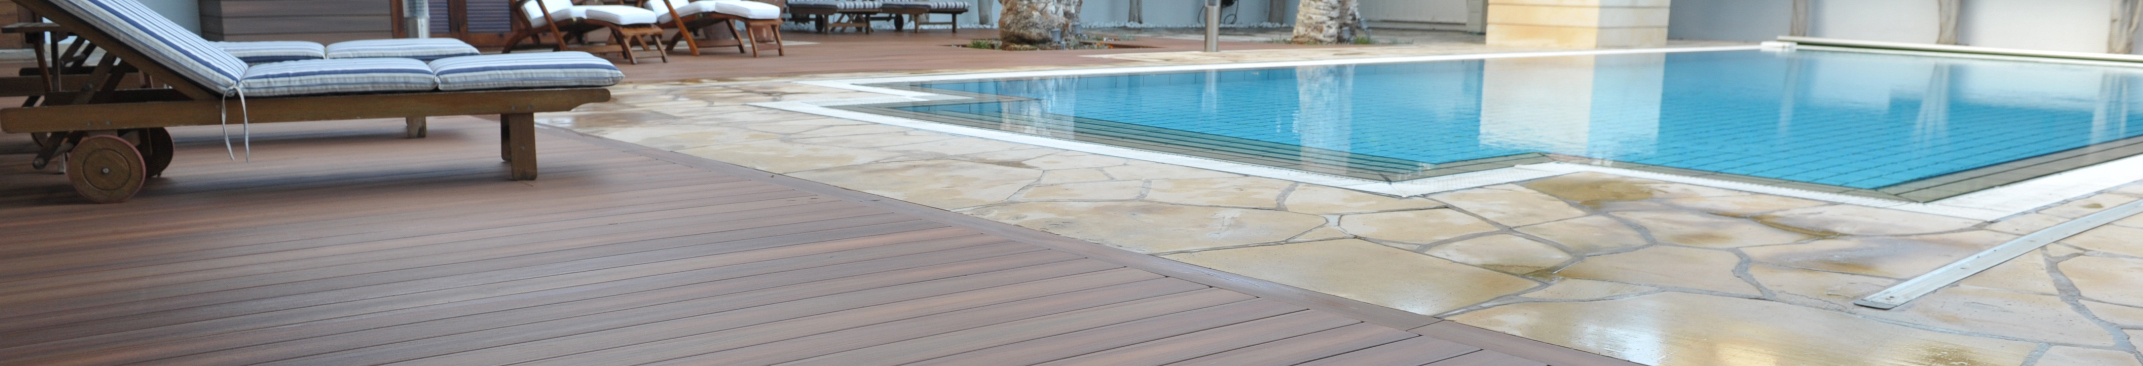 How to Choose Composite Decking & Cladding